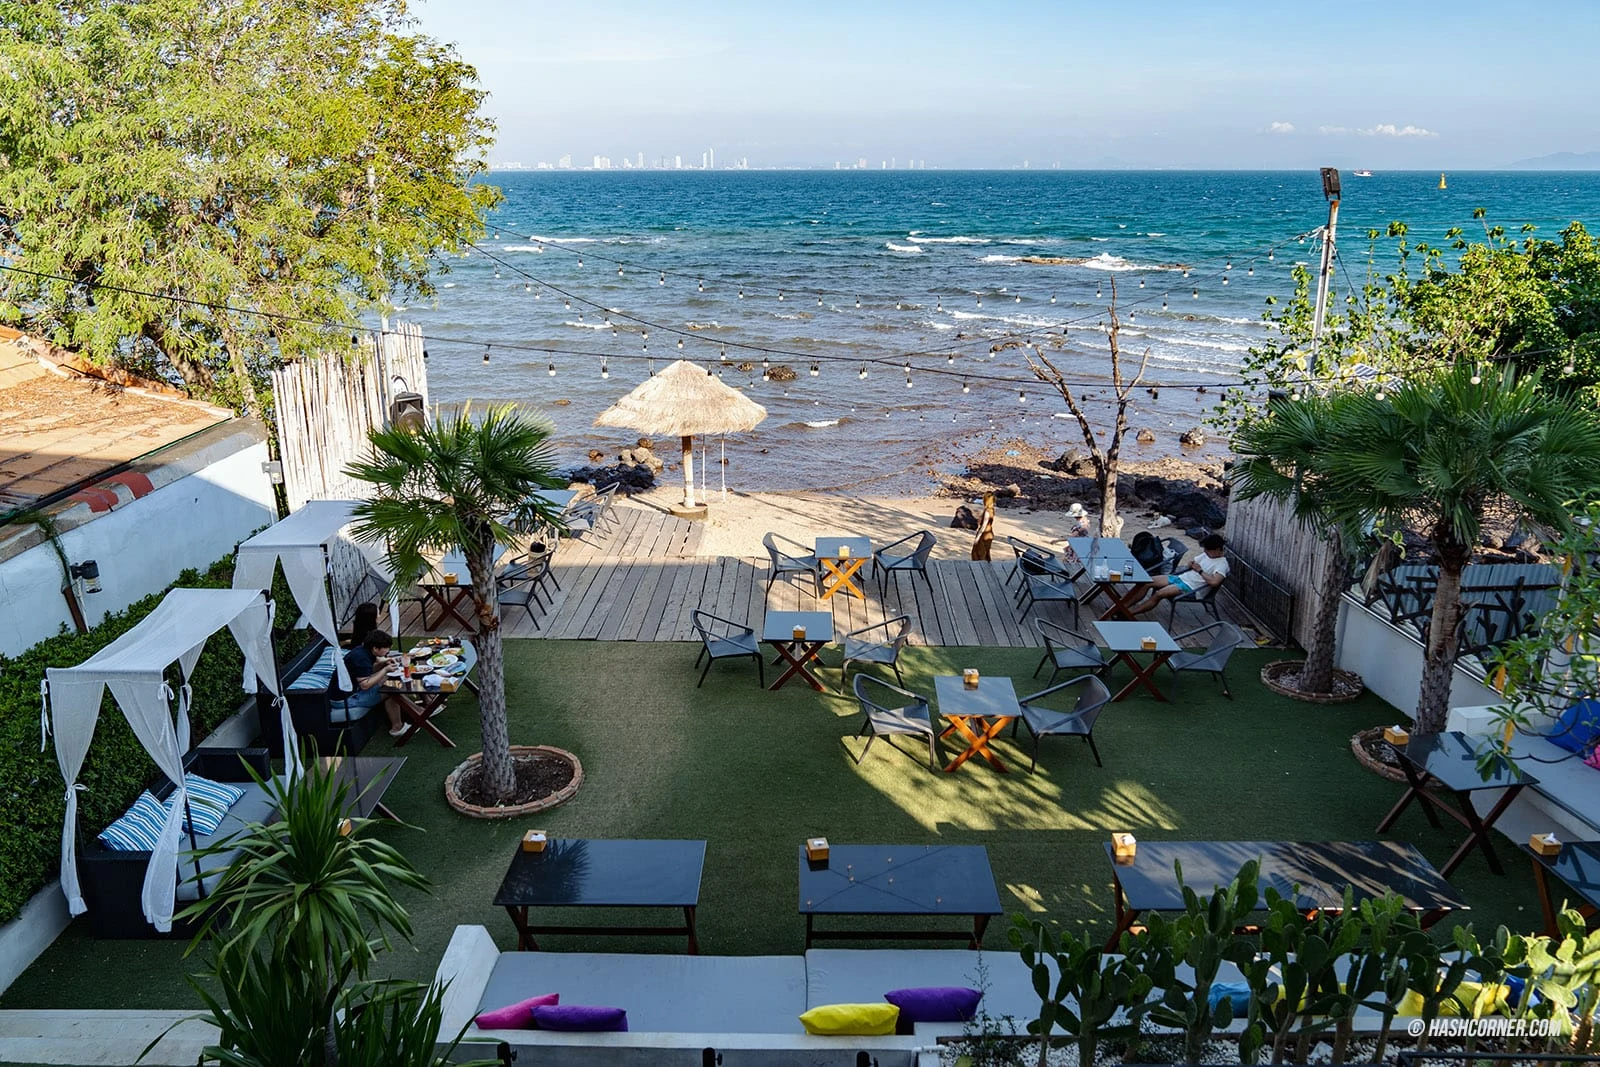 Koh Larn: A Local&#8217;s In-depth Travel Review to Pattaya&#8217;s Paradise